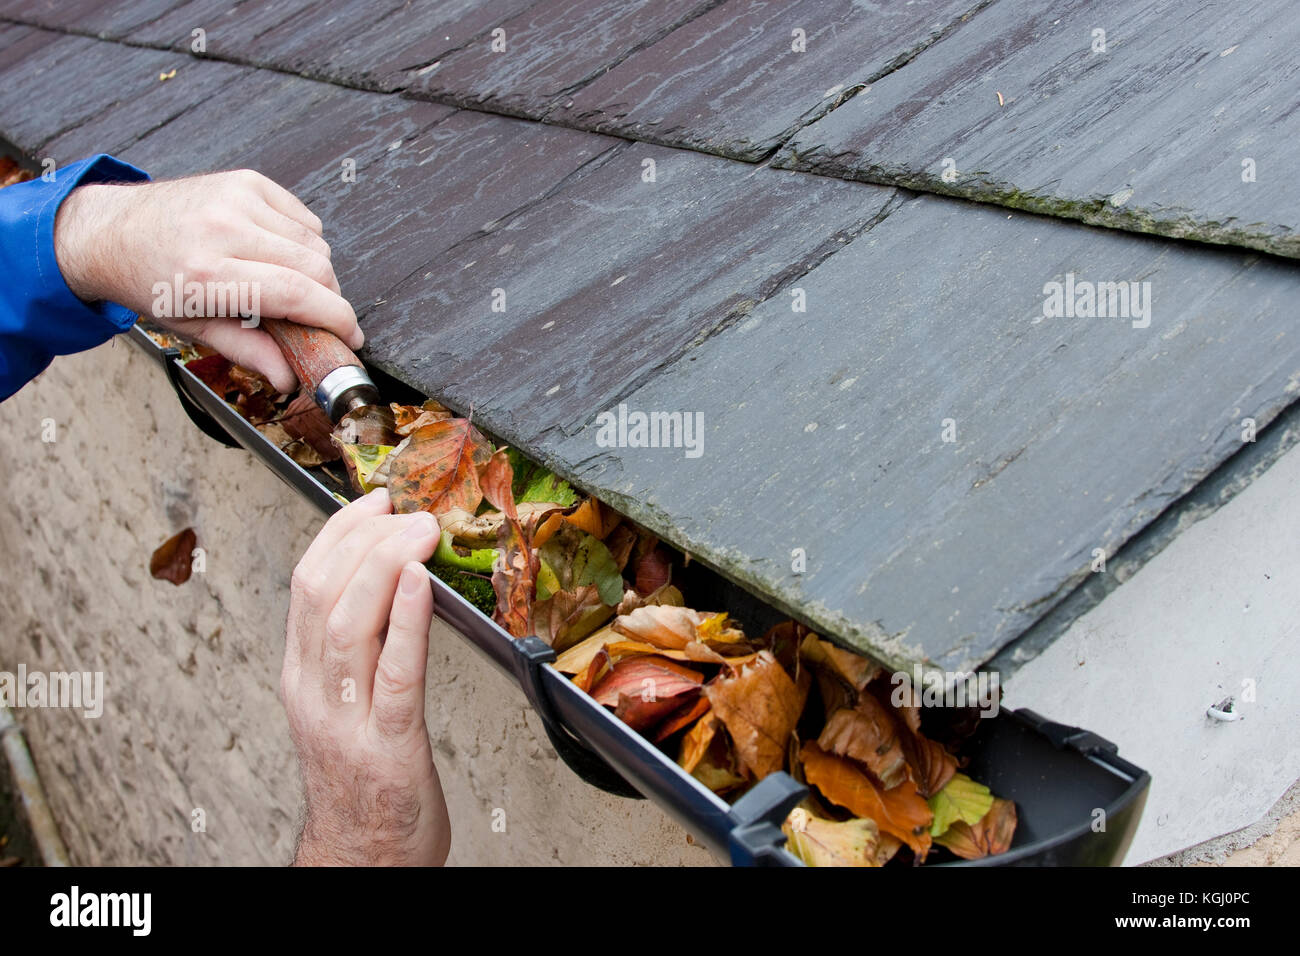 clearing gutter blocked with autumn leaves Stock Photo